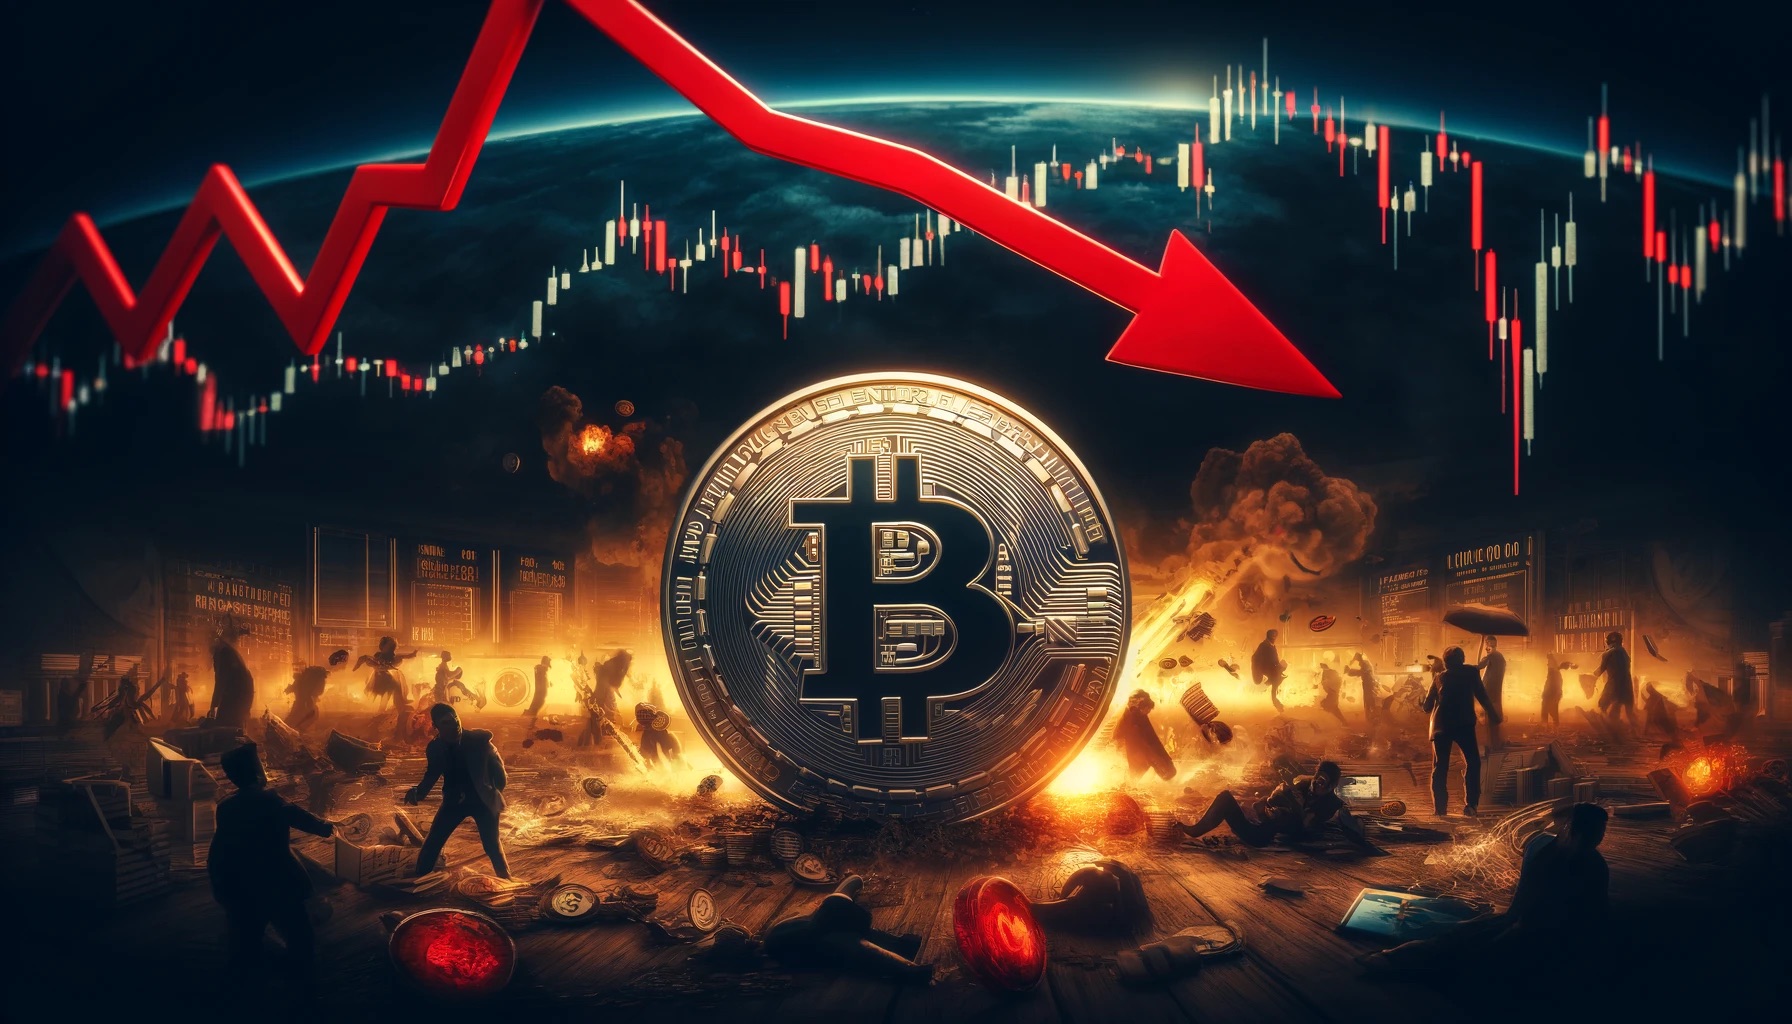 Bitcoin Crash Below $67,000 Sends Market Spiraling, Here Are The Levels To Watch